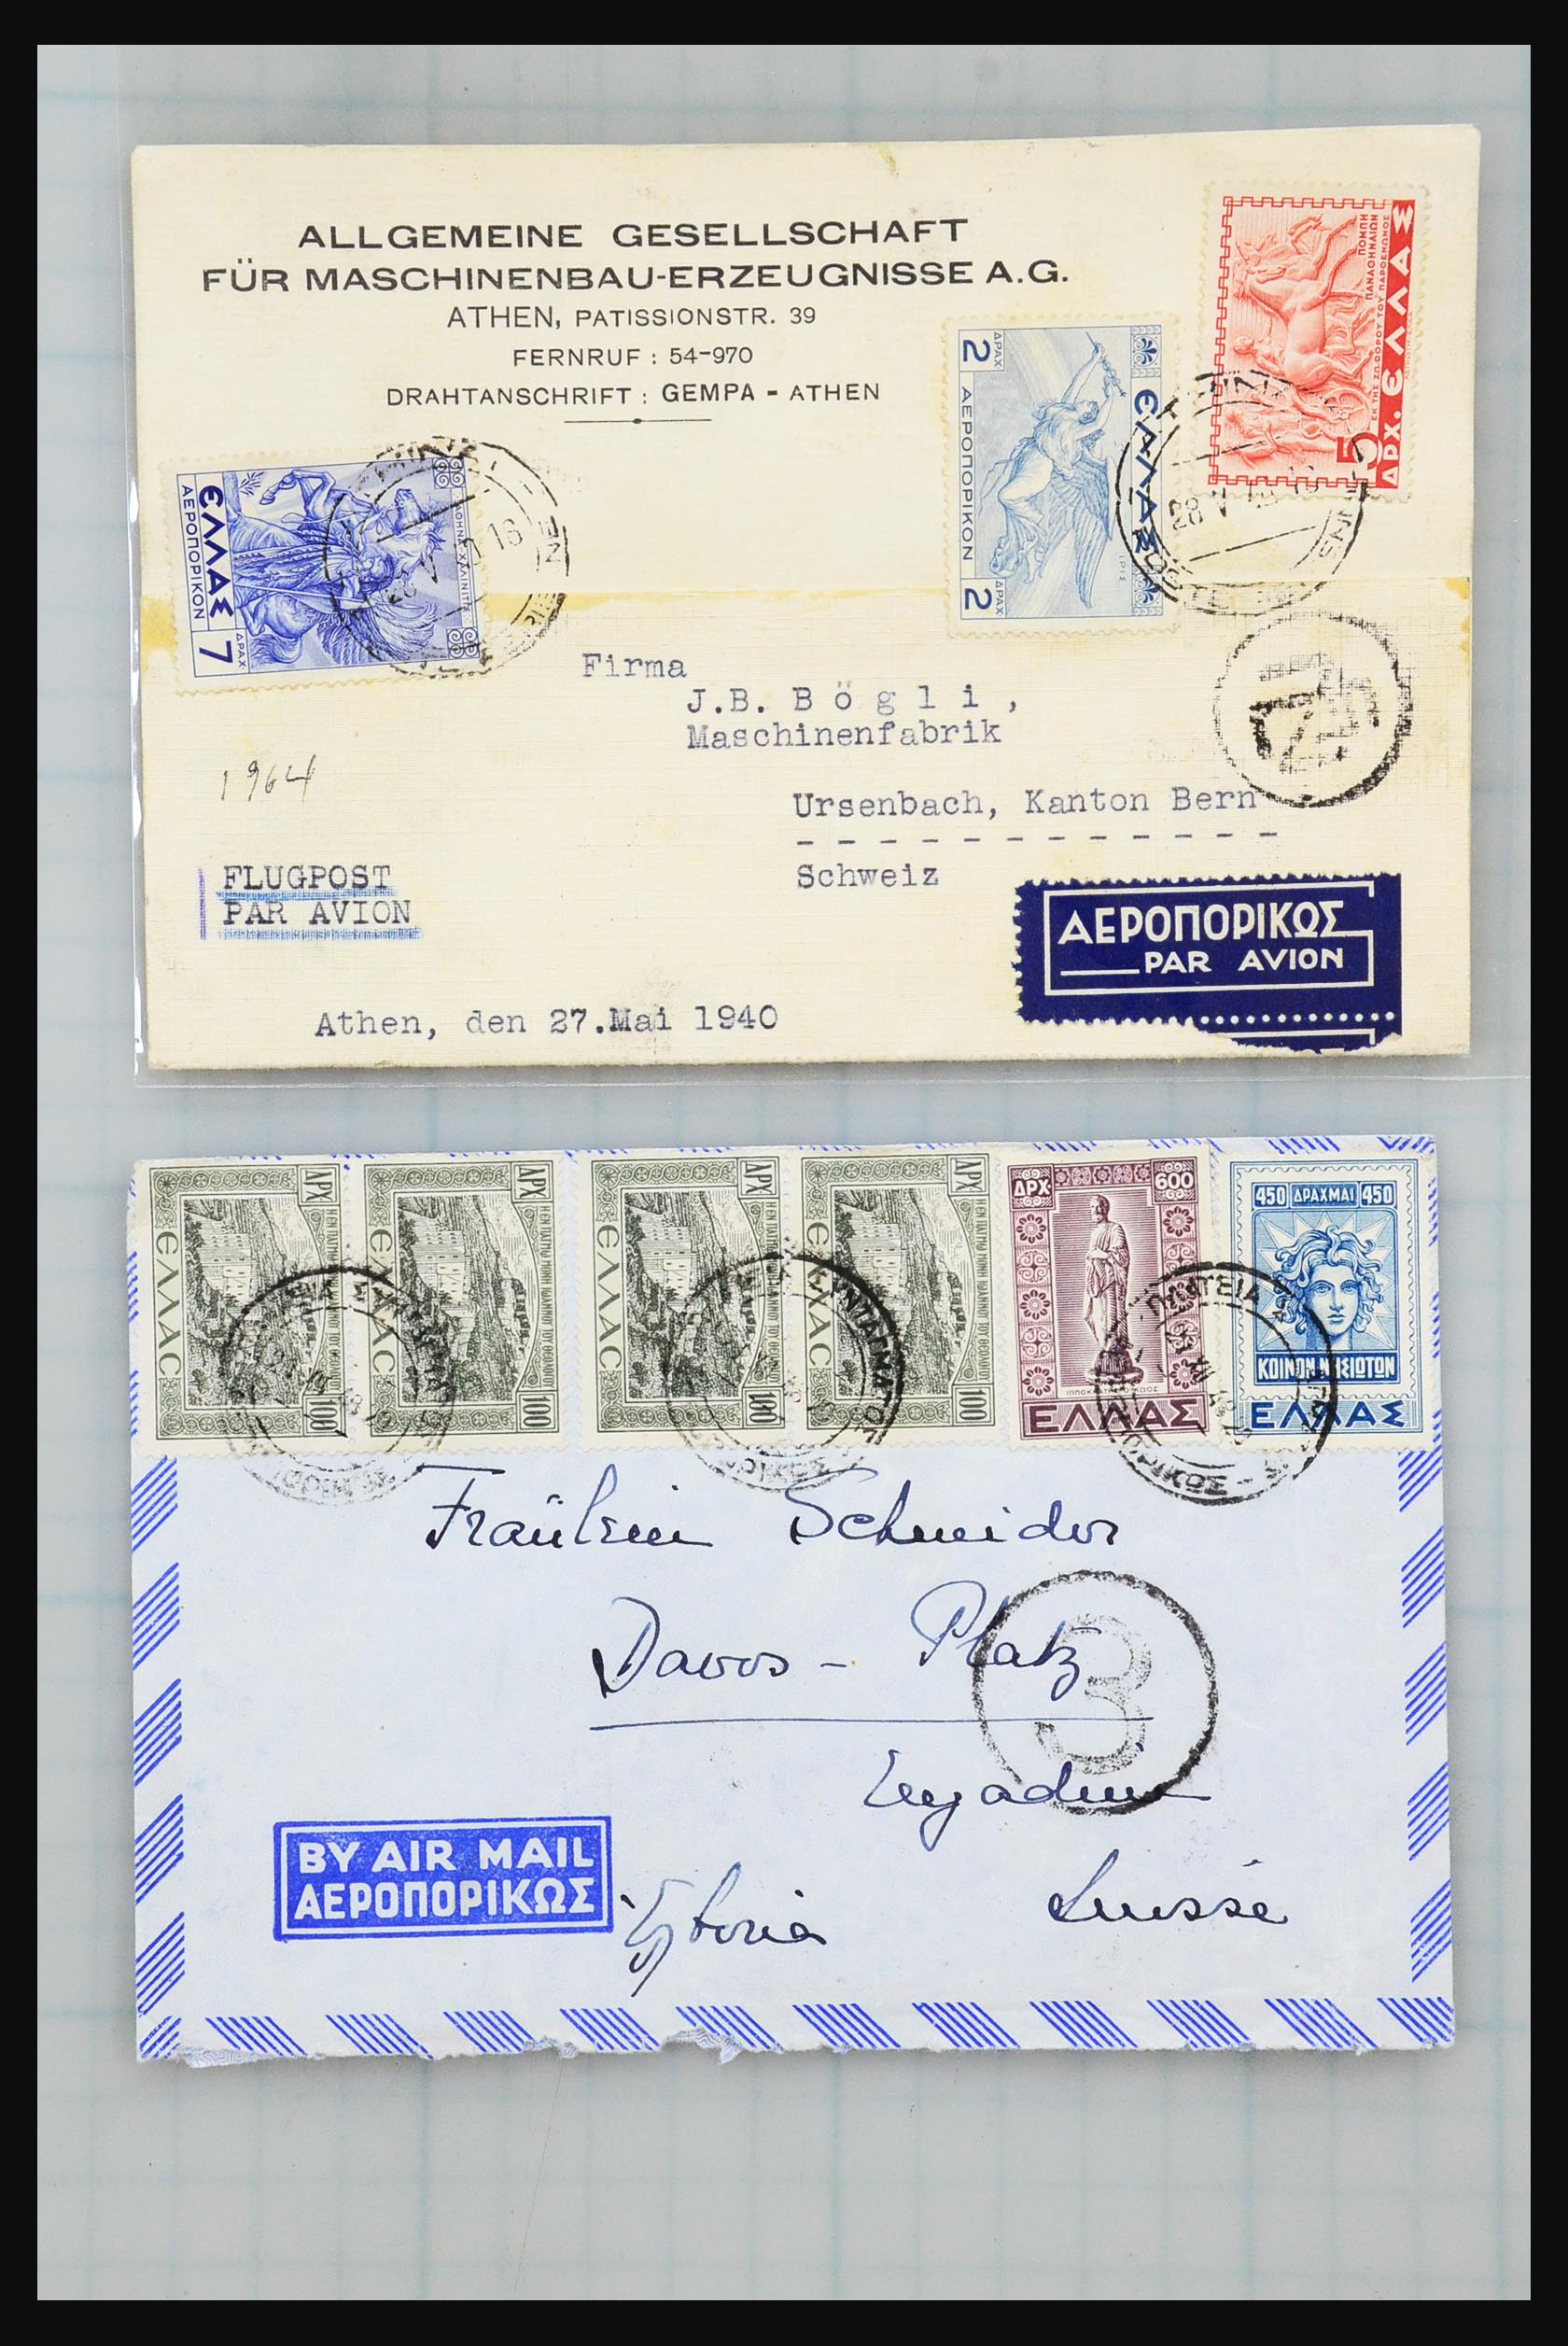 31358 020 - 31358 Portugal/Luxemburg/Greece covers 1880-1960.